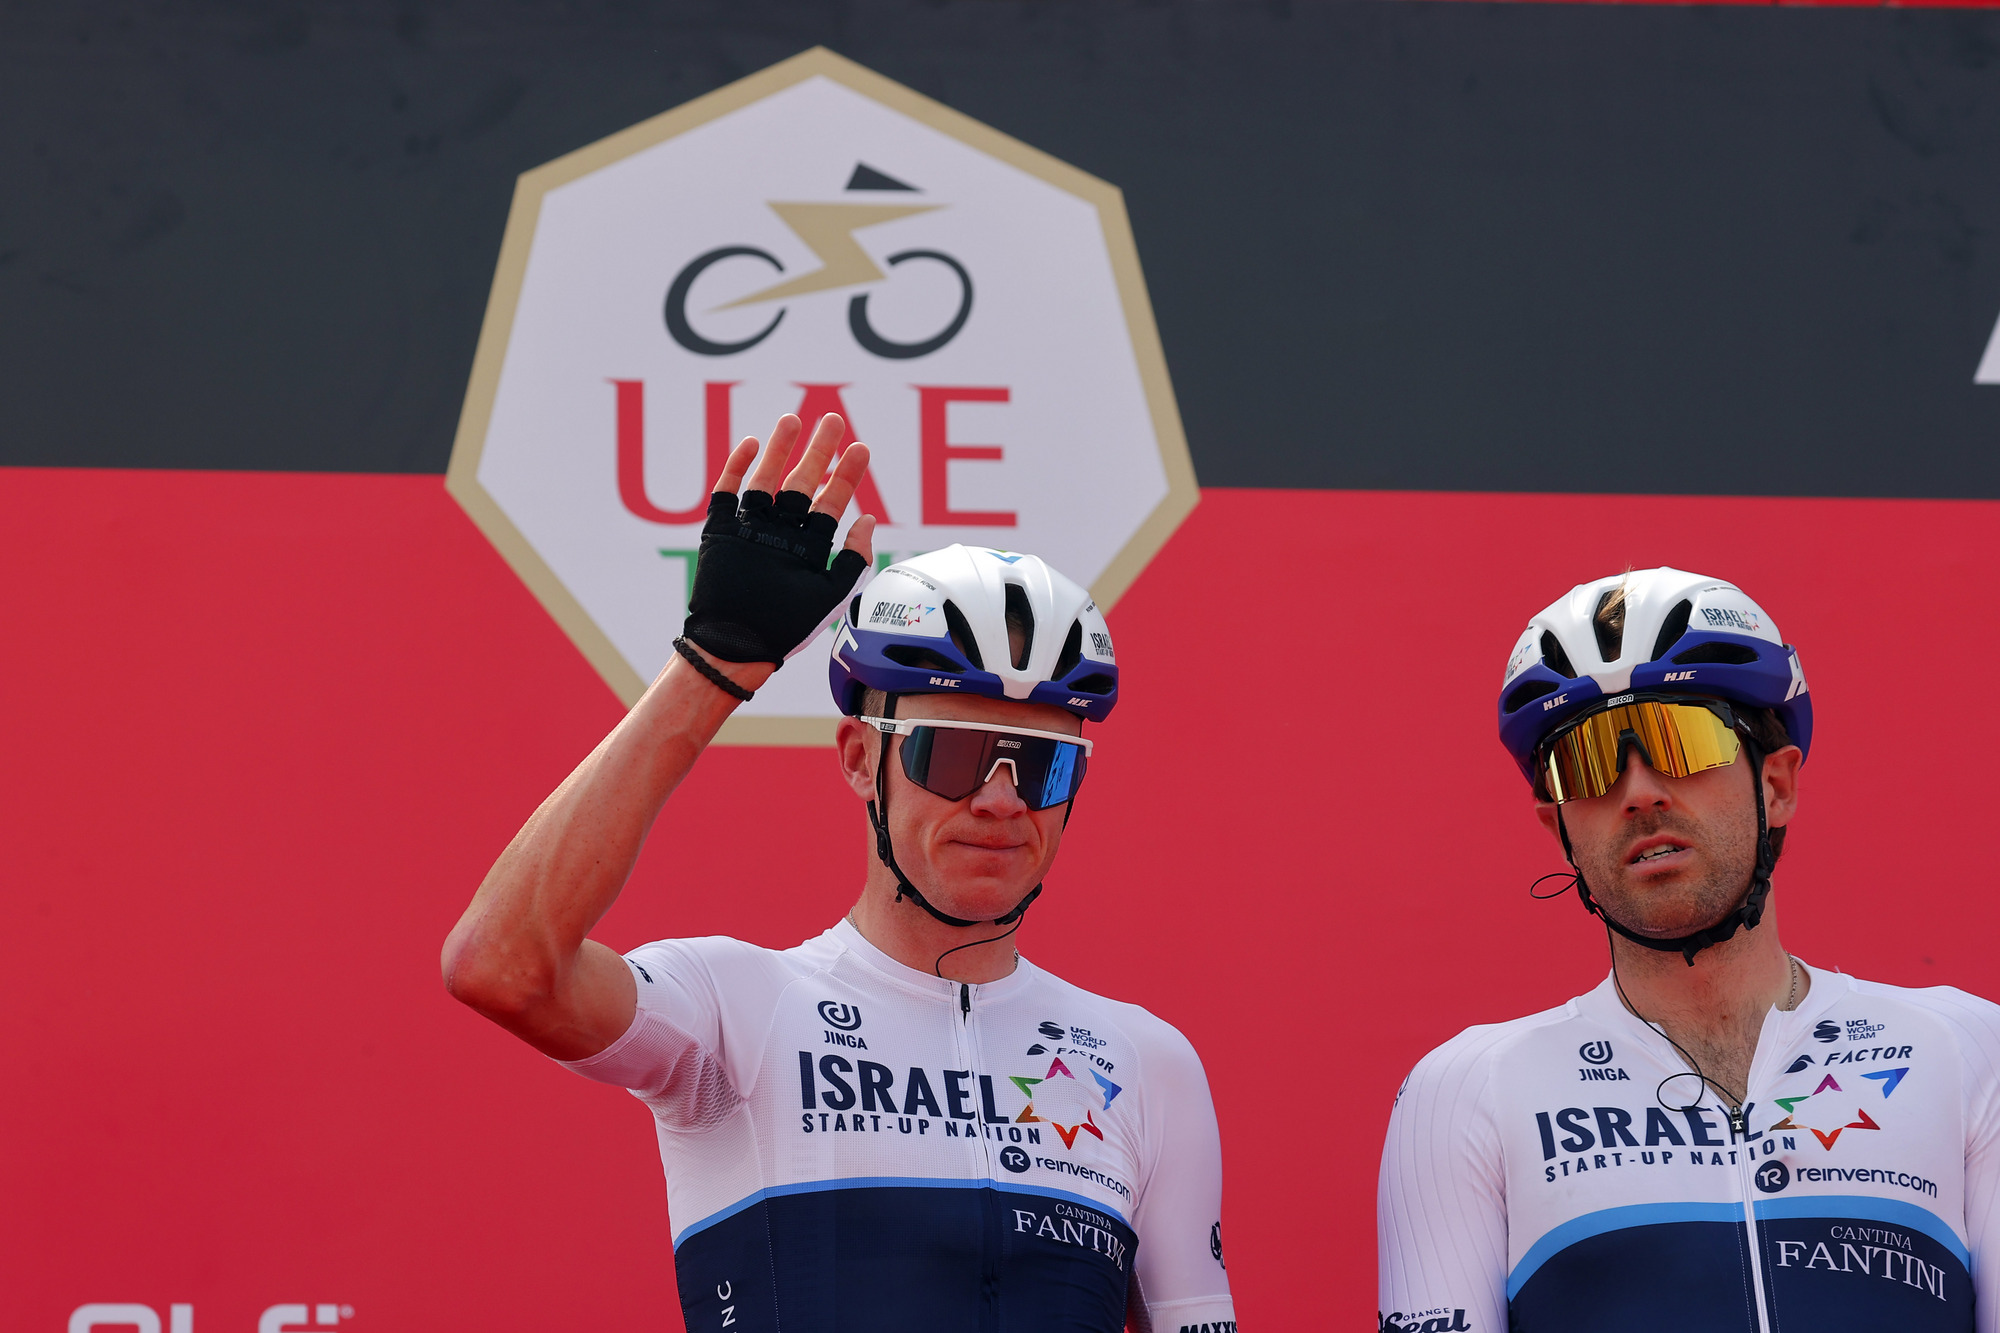 Chris Froome on the podium at the UAE Tour